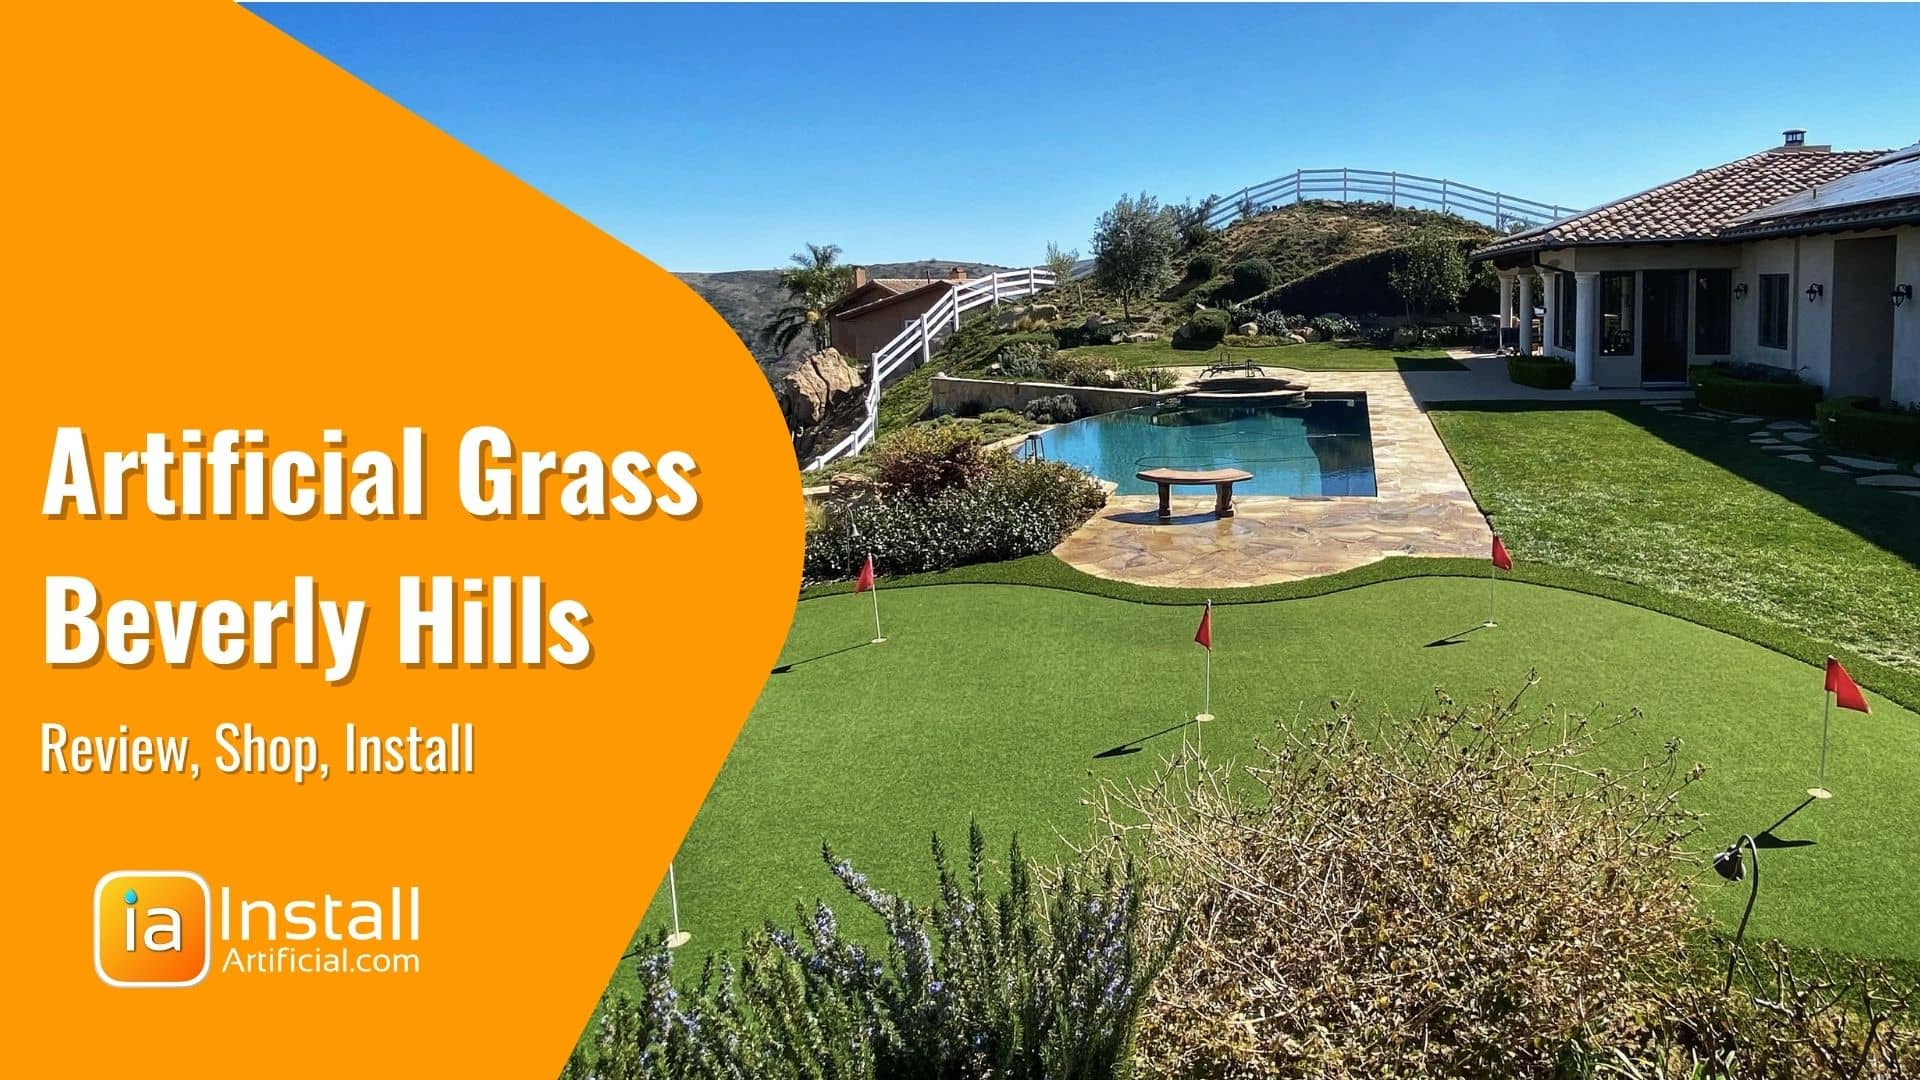 How Much Does it Cost to Install Artificial Grass in Beverly Hills?